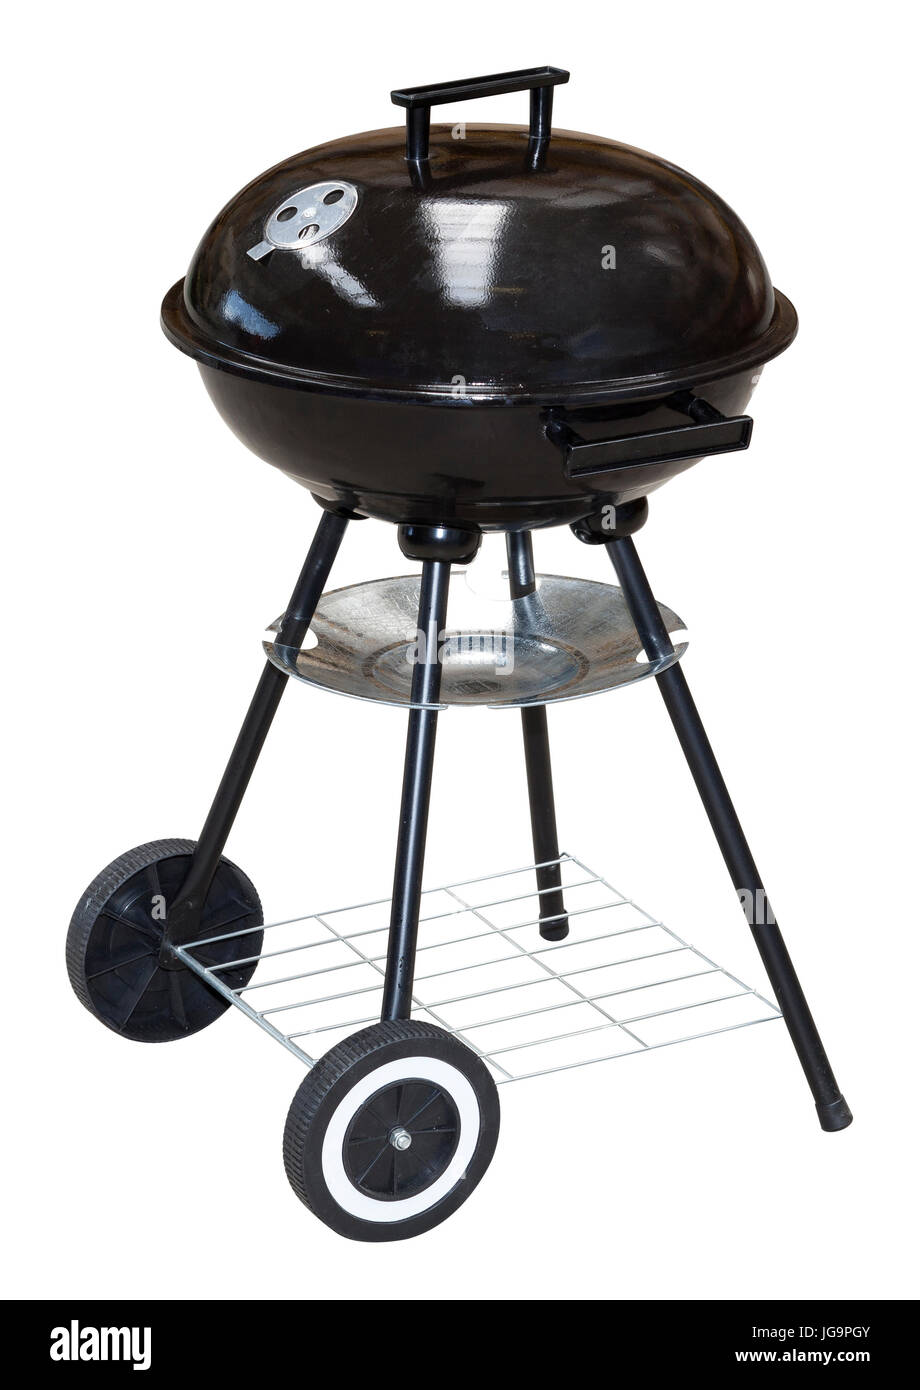 Barbecue chariot noir Barbecue on white with clipping path inclus Banque D'Images